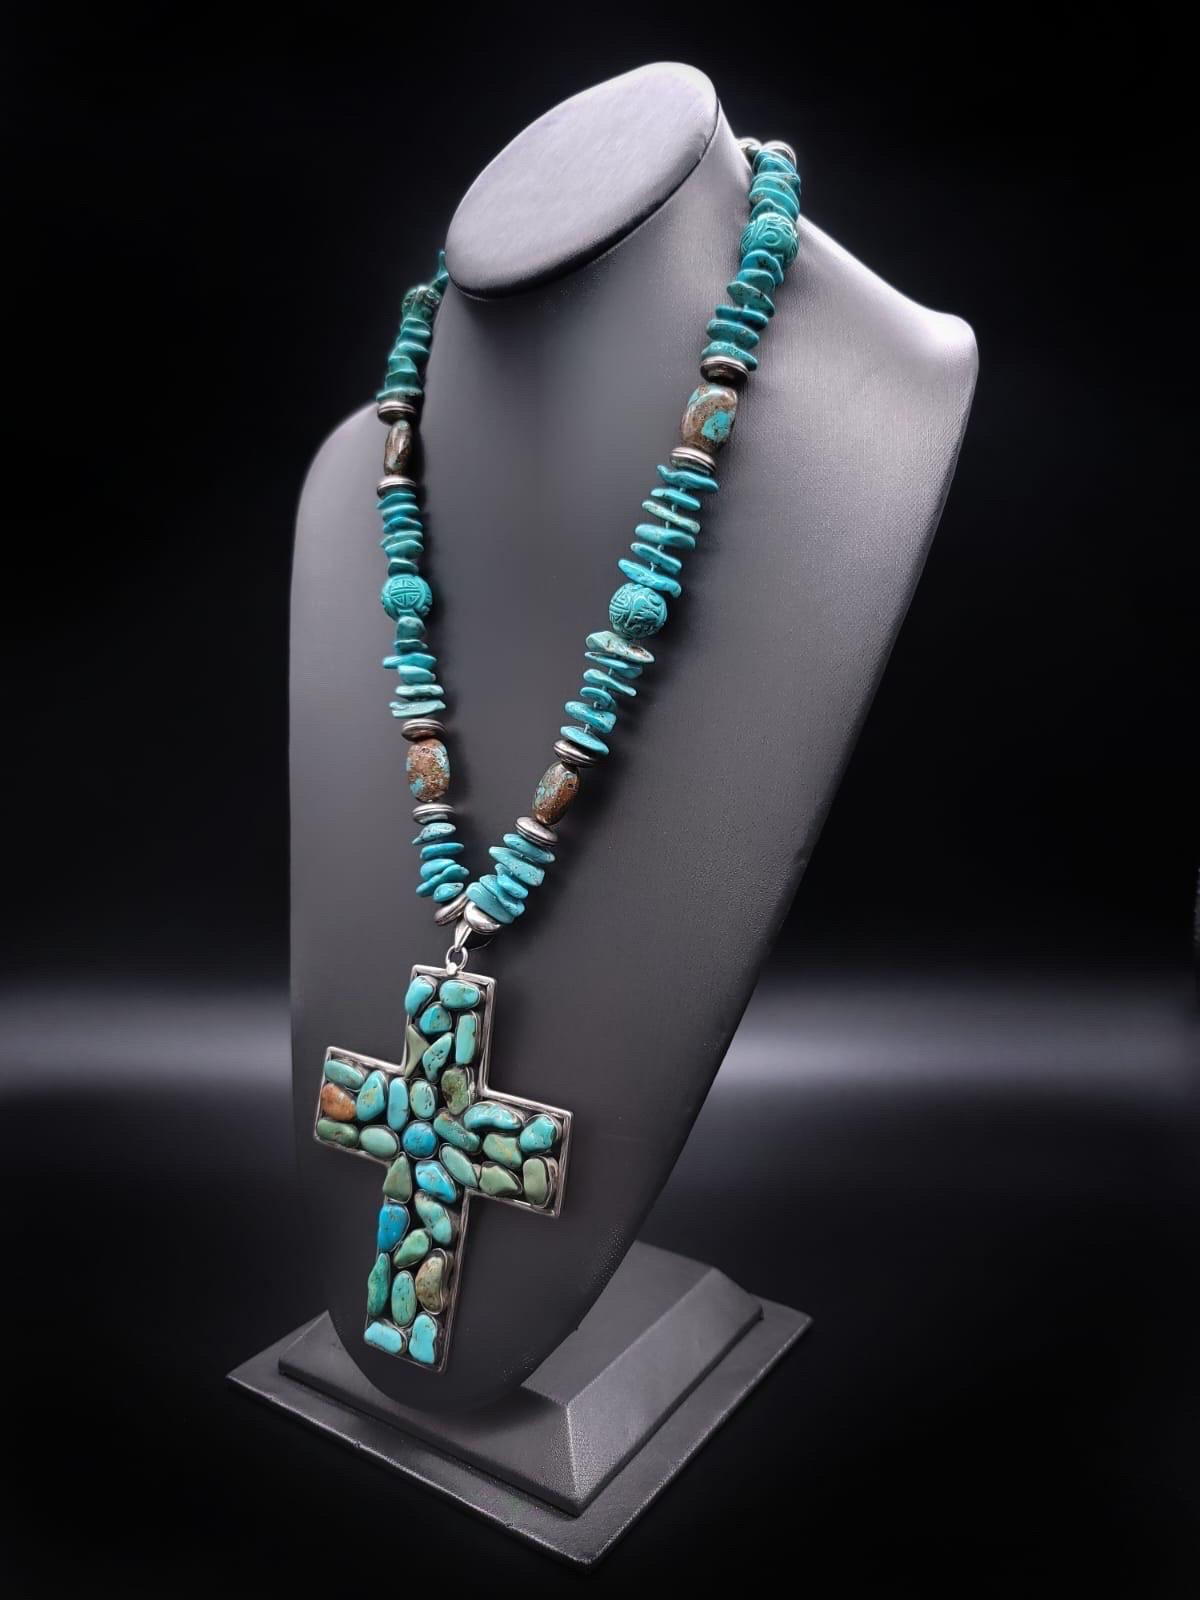 One-of-a-Kind

This exquisite long Turquoise necklace boasts a large 4''x3'' silver and Turquoise cross pendant made in Mexico. The pendant features approximately 27 mixed turquoise polished beads, each individually set in silver. The necklace